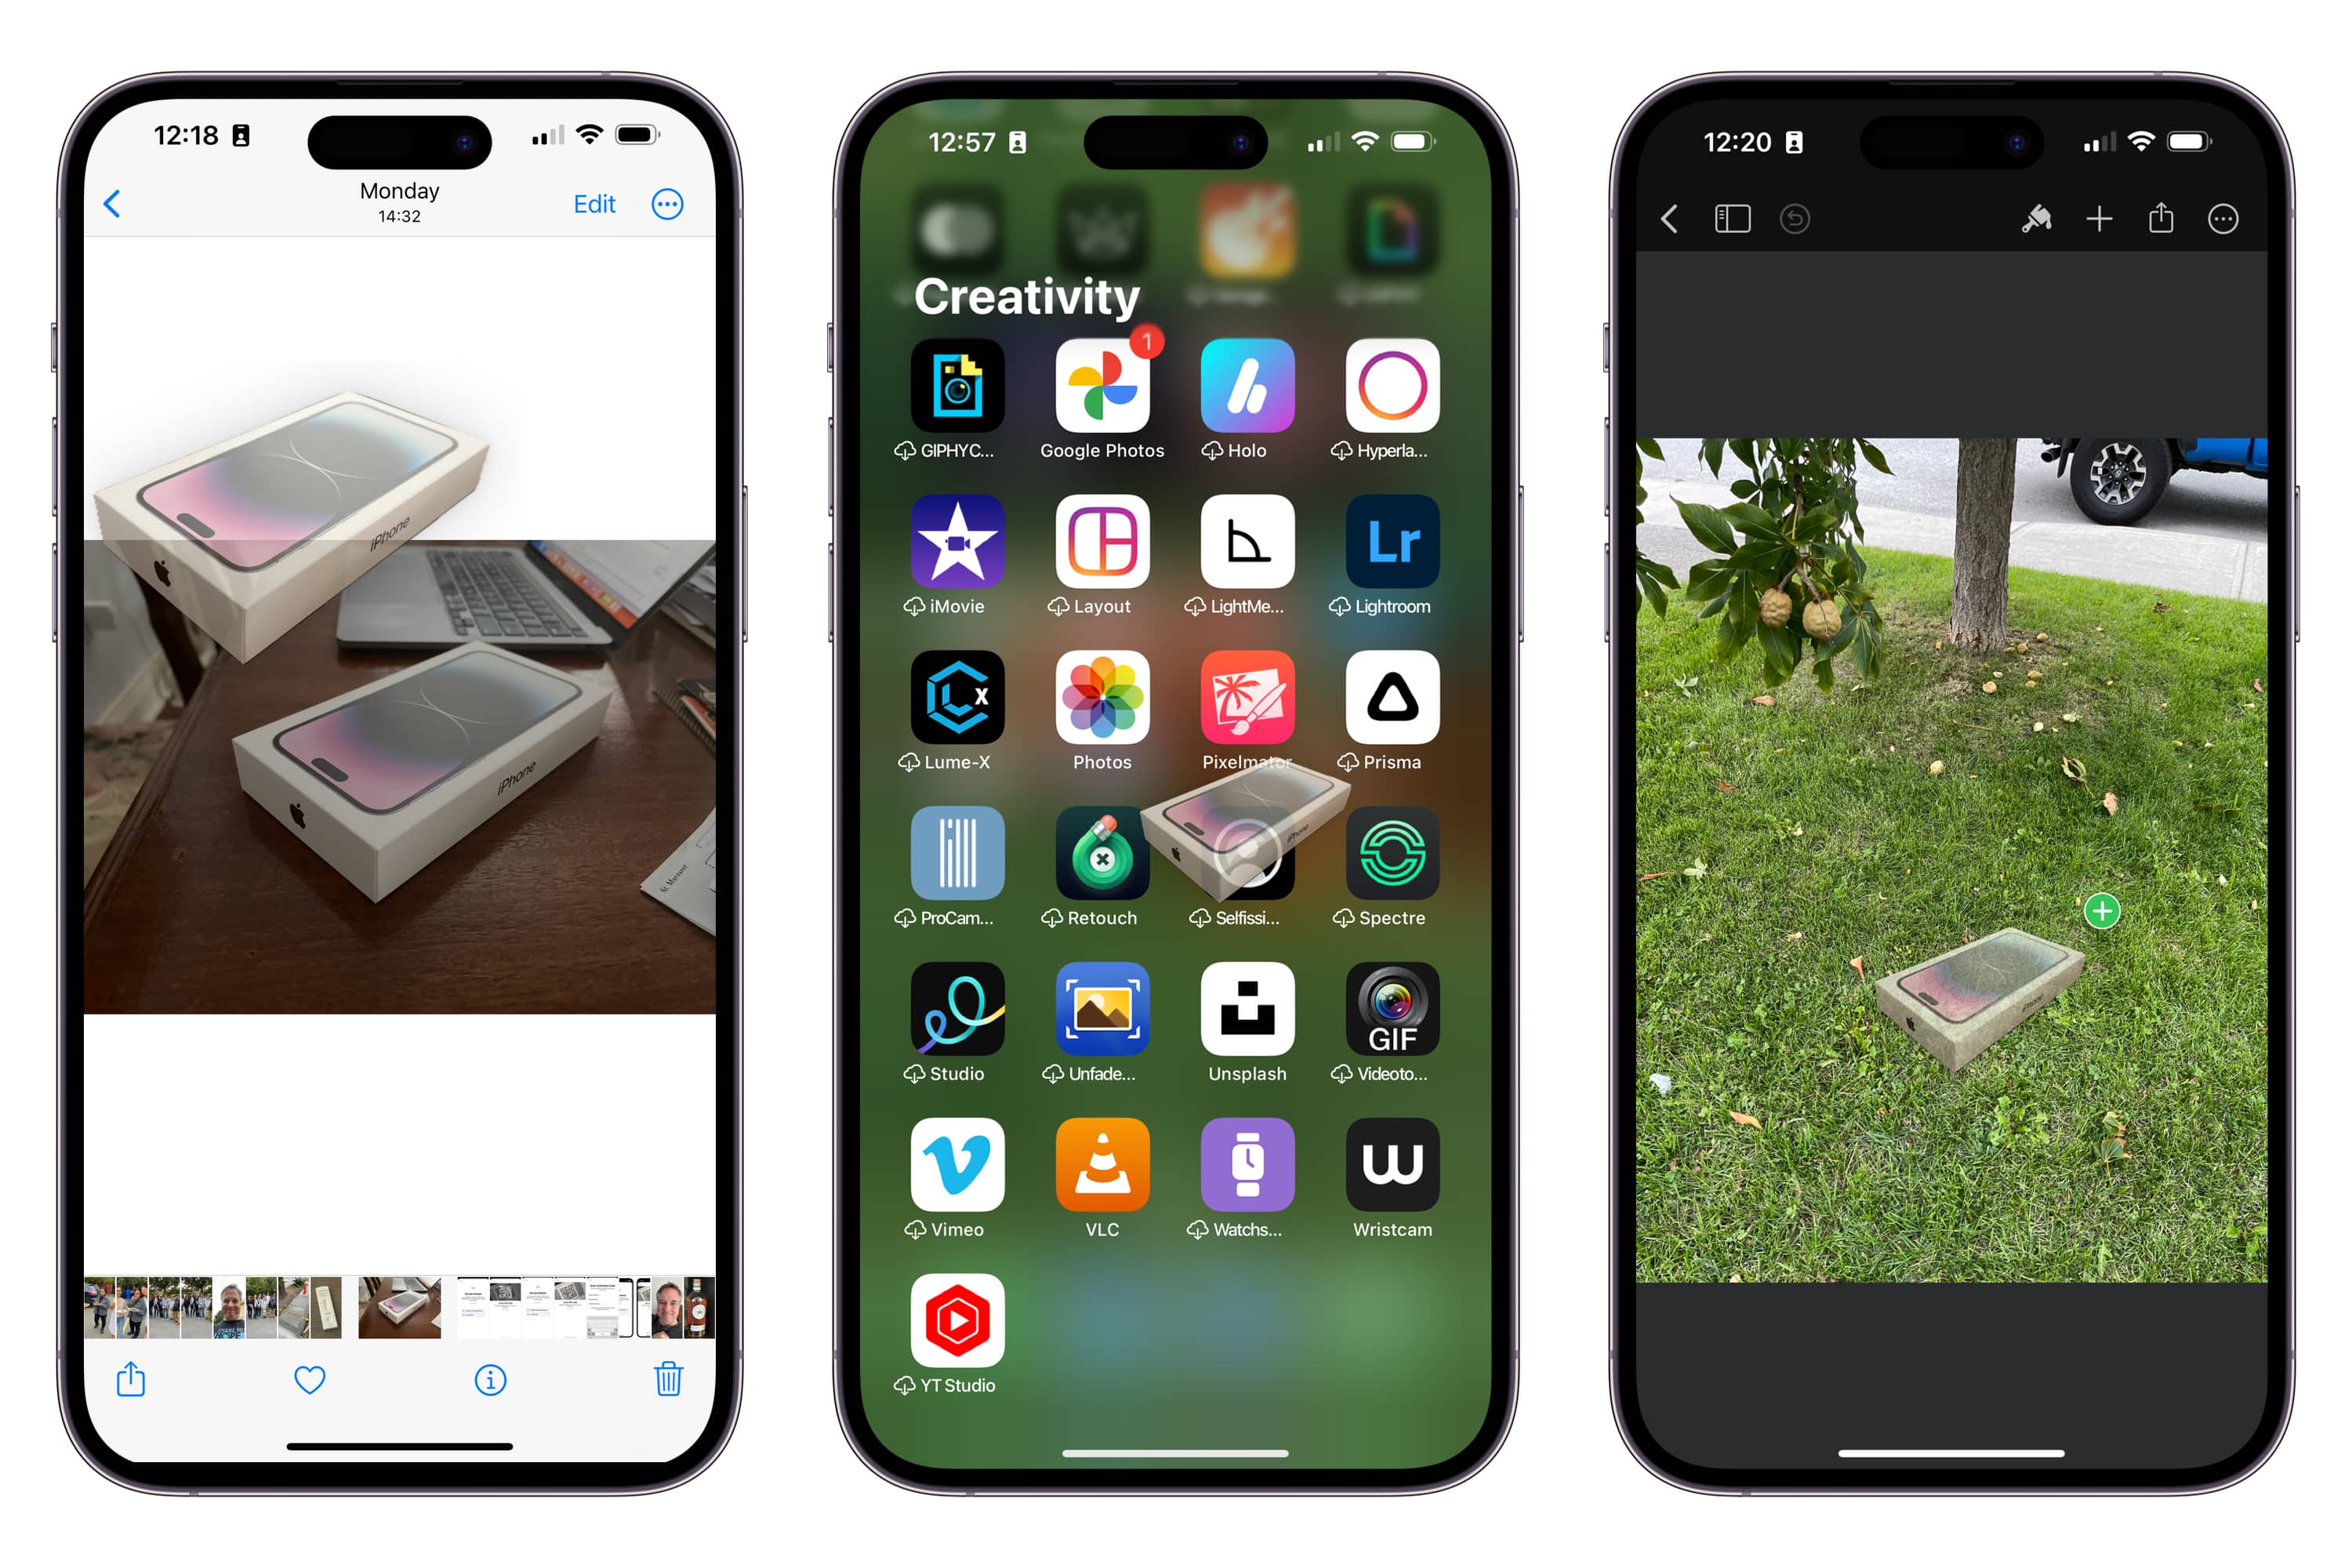 Three iPhones show steps for dragging and dropping the subject of an image into a photo editing app.